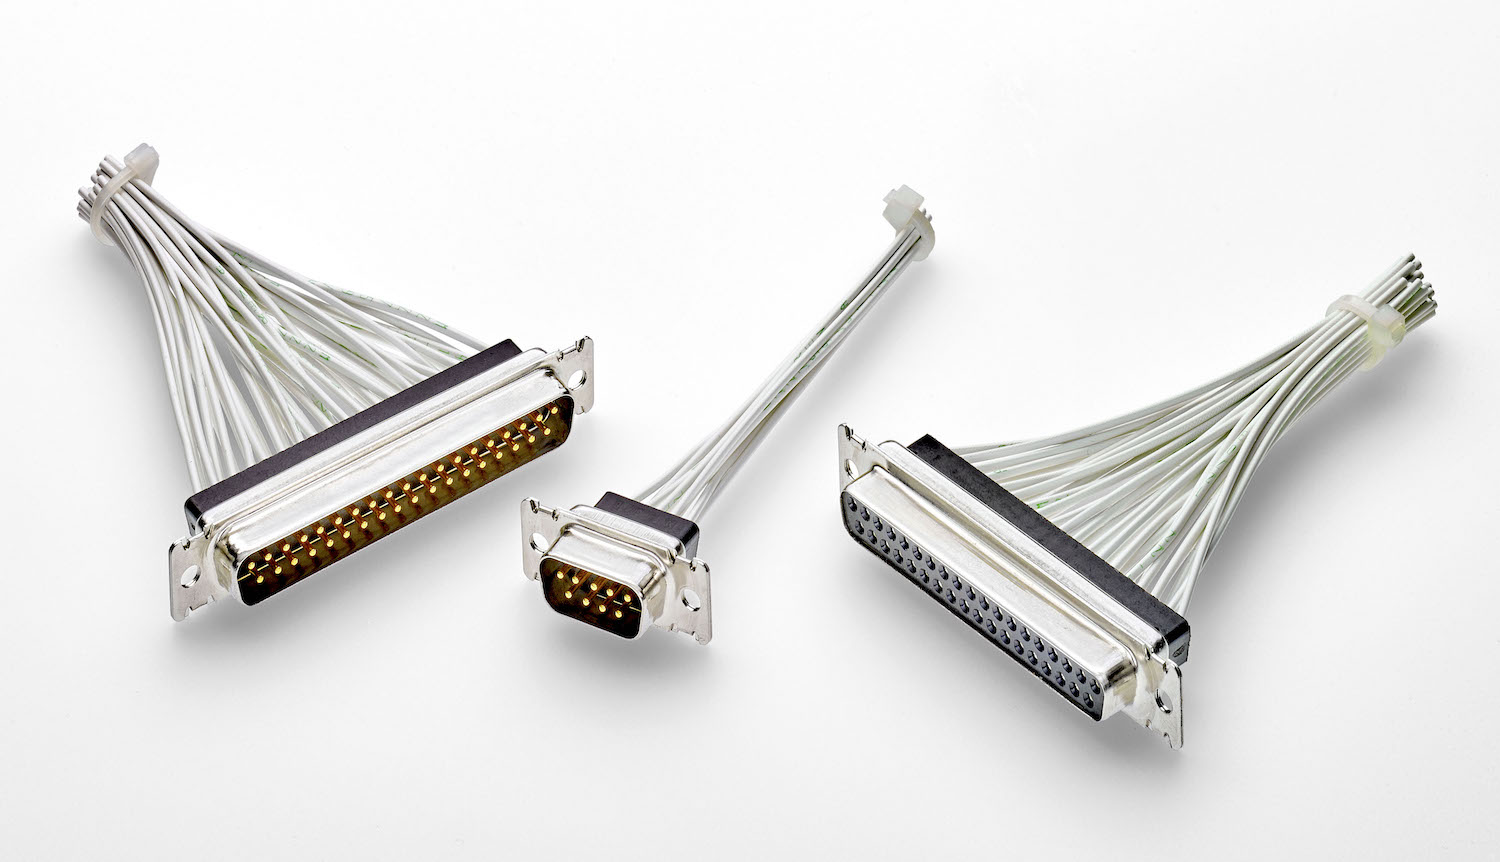 New Connector and Cable Products: March 2019 - TE Connectivity’s new AMPLIMITE Stainless Steel D-Subminiature Connectors